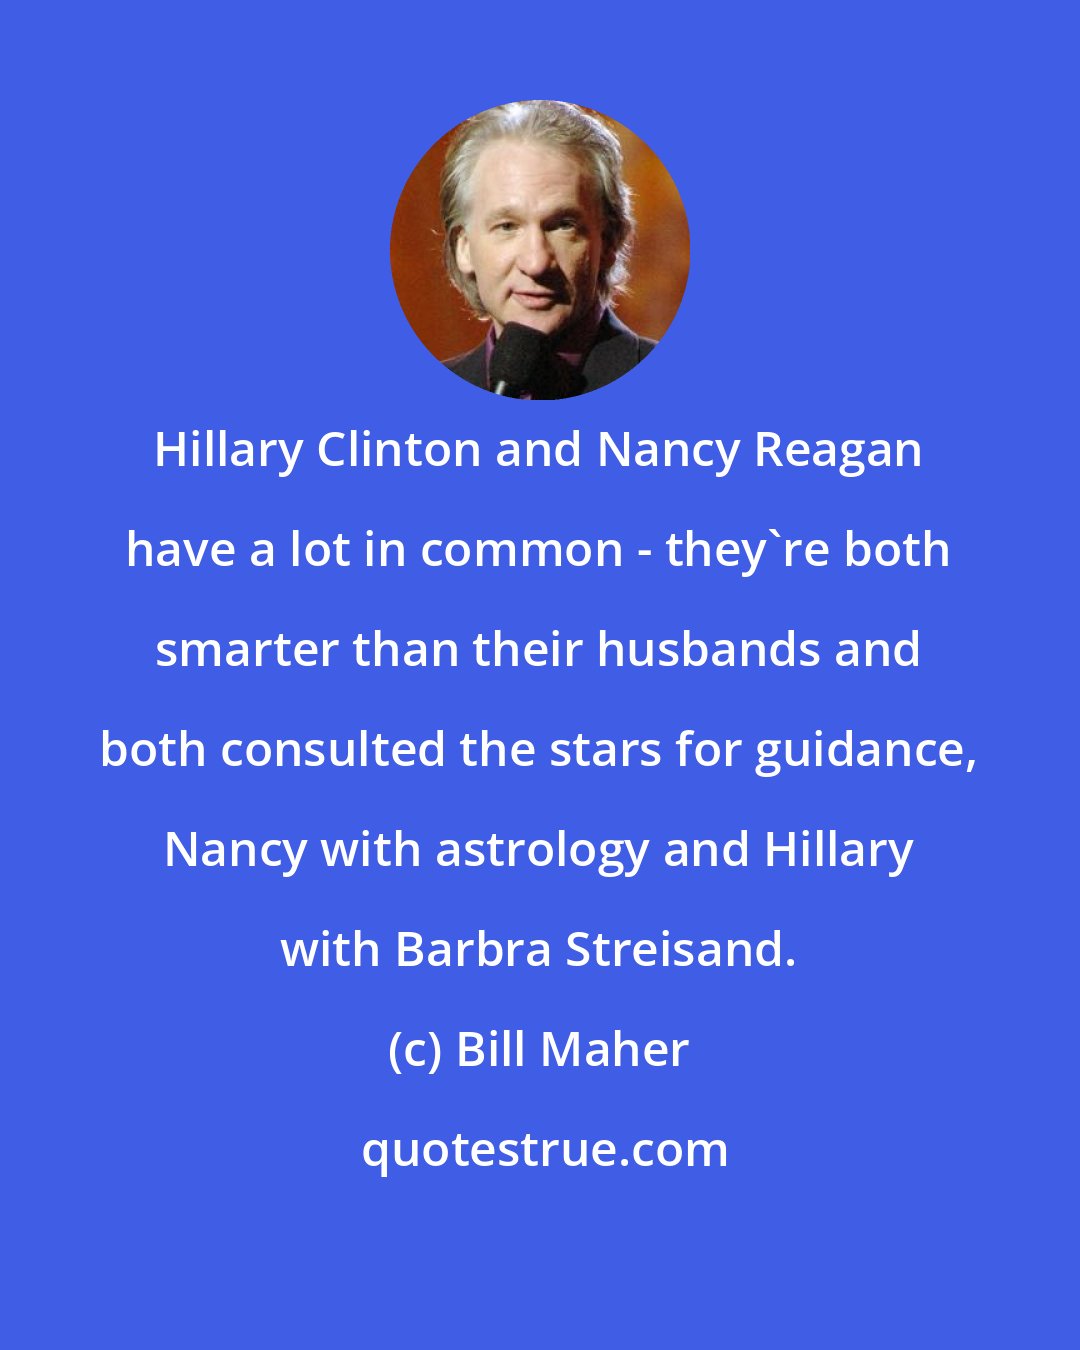 Bill Maher: Hillary Clinton and Nancy Reagan have a lot in common - they're both smarter than their husbands and both consulted the stars for guidance, Nancy with astrology and Hillary with Barbra Streisand.